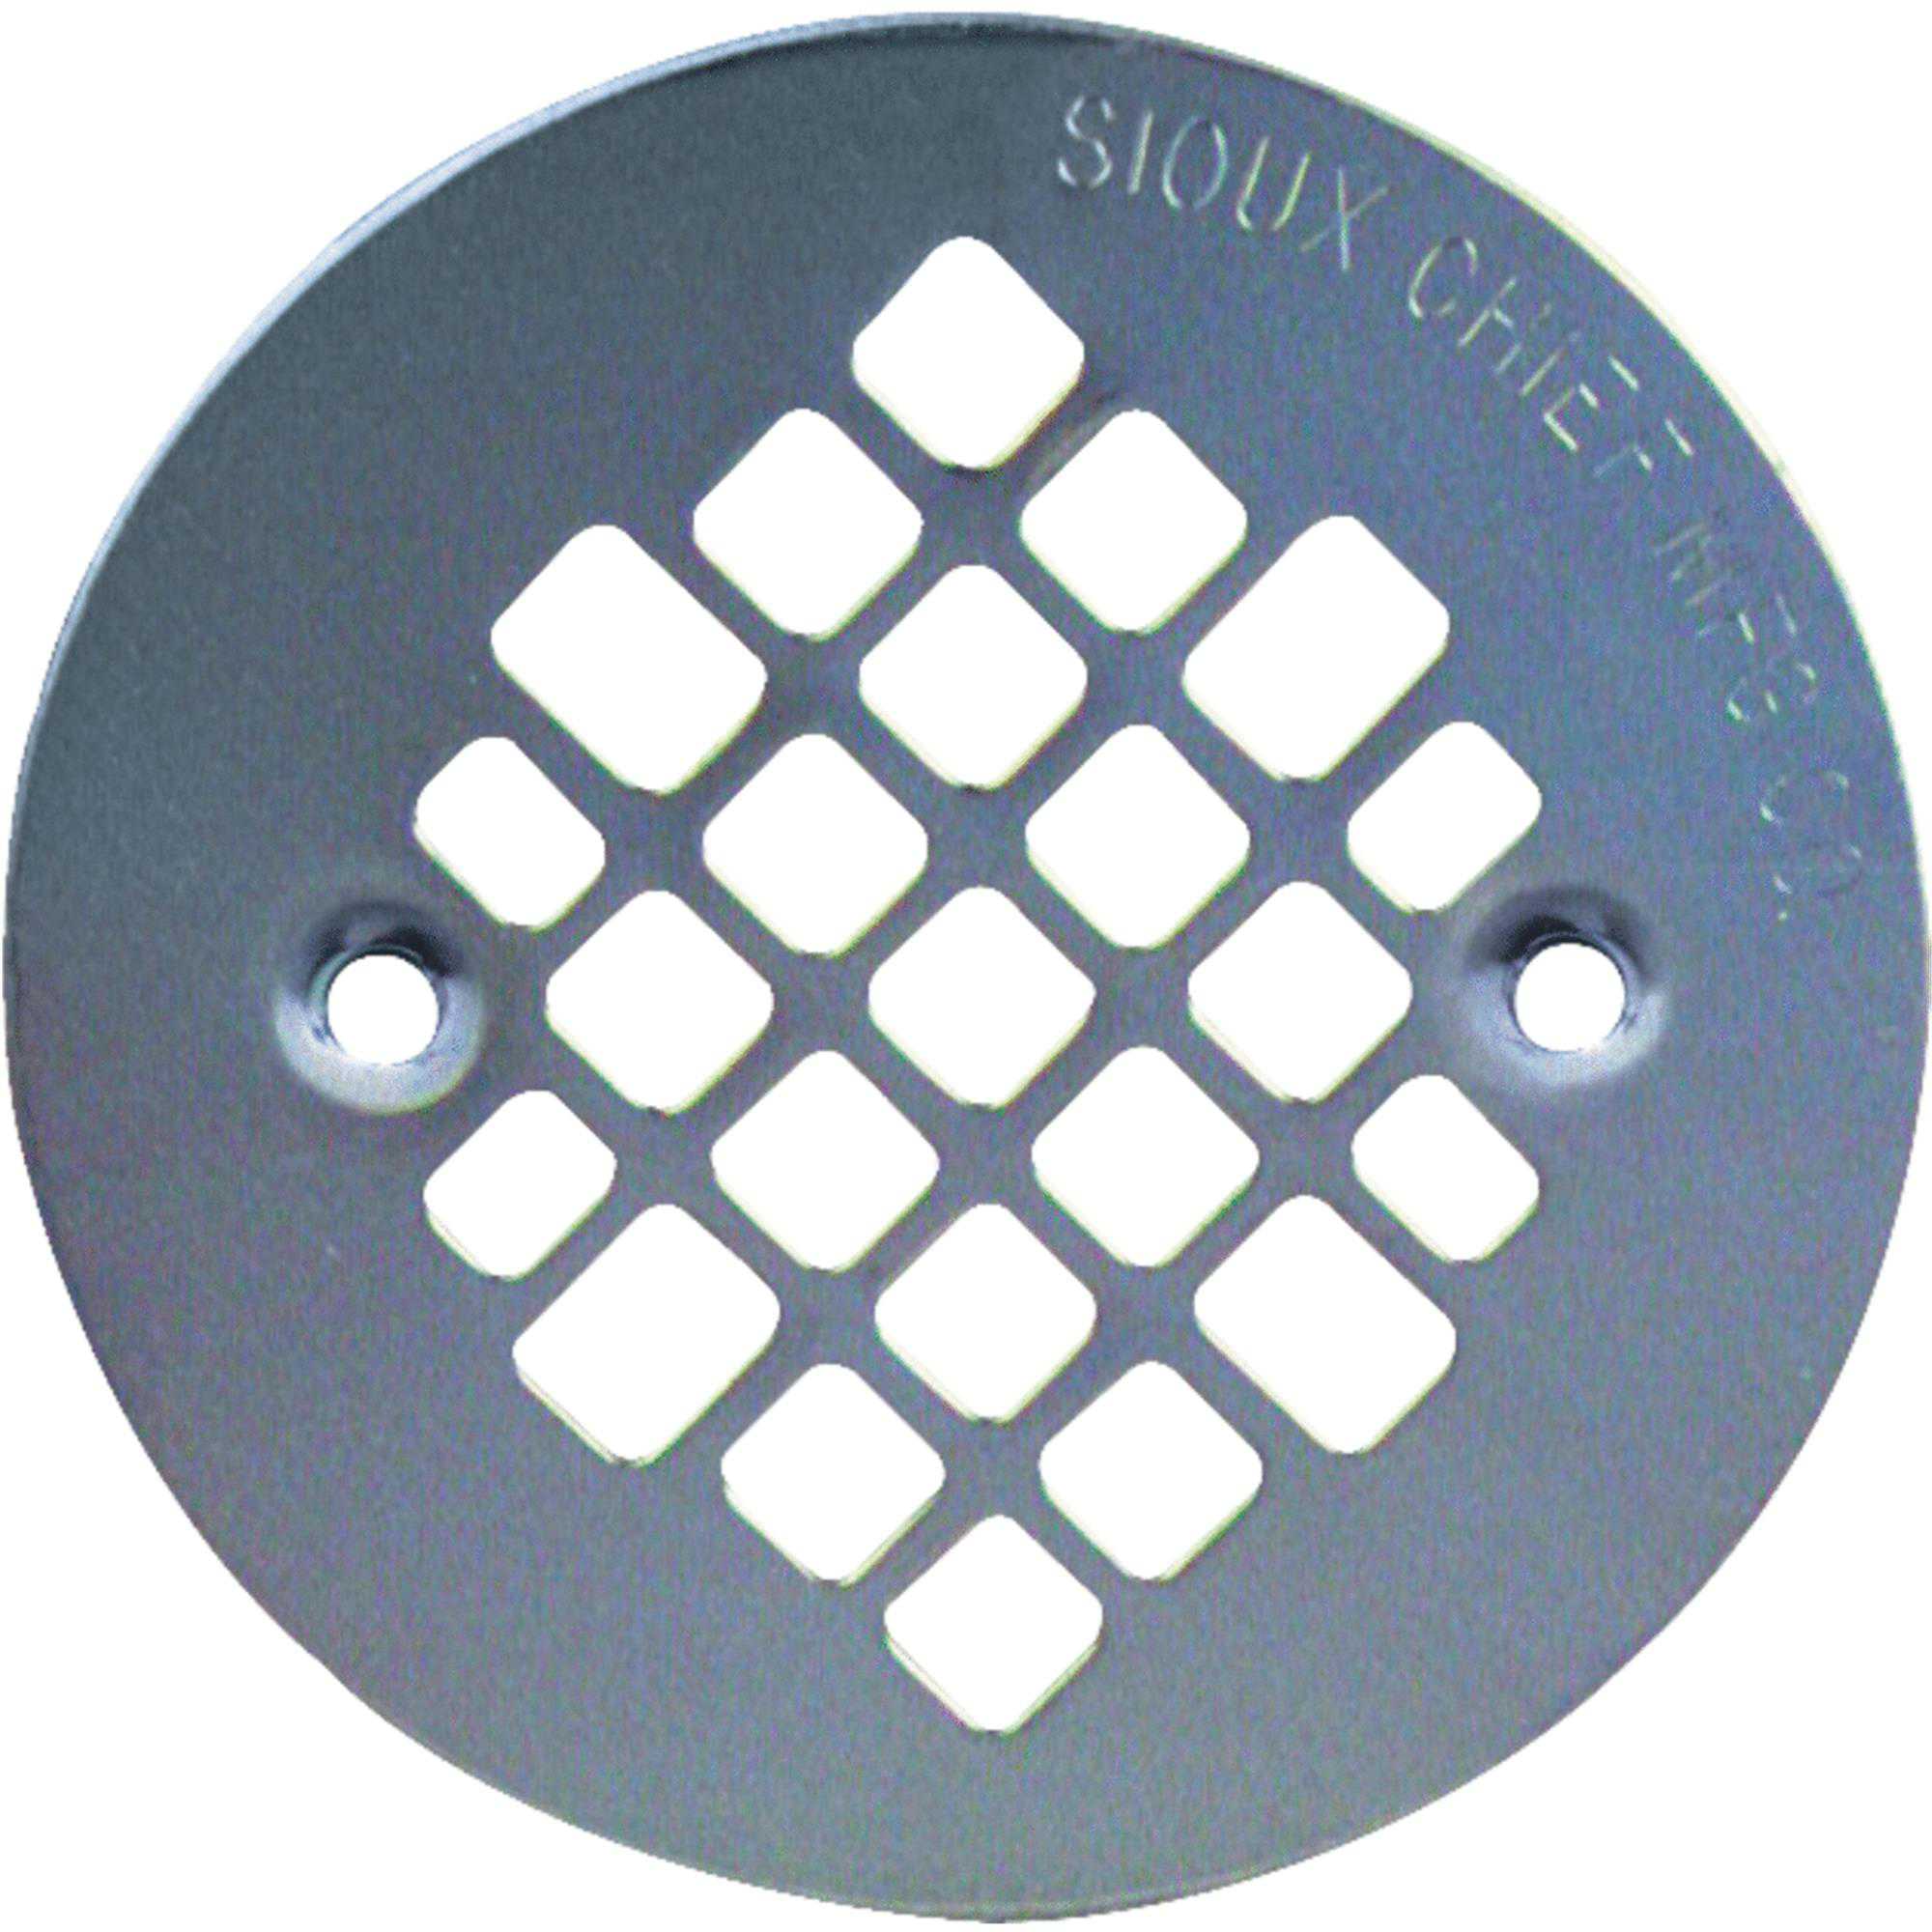 Stainless Steel Shower Drain Strainer With Screws